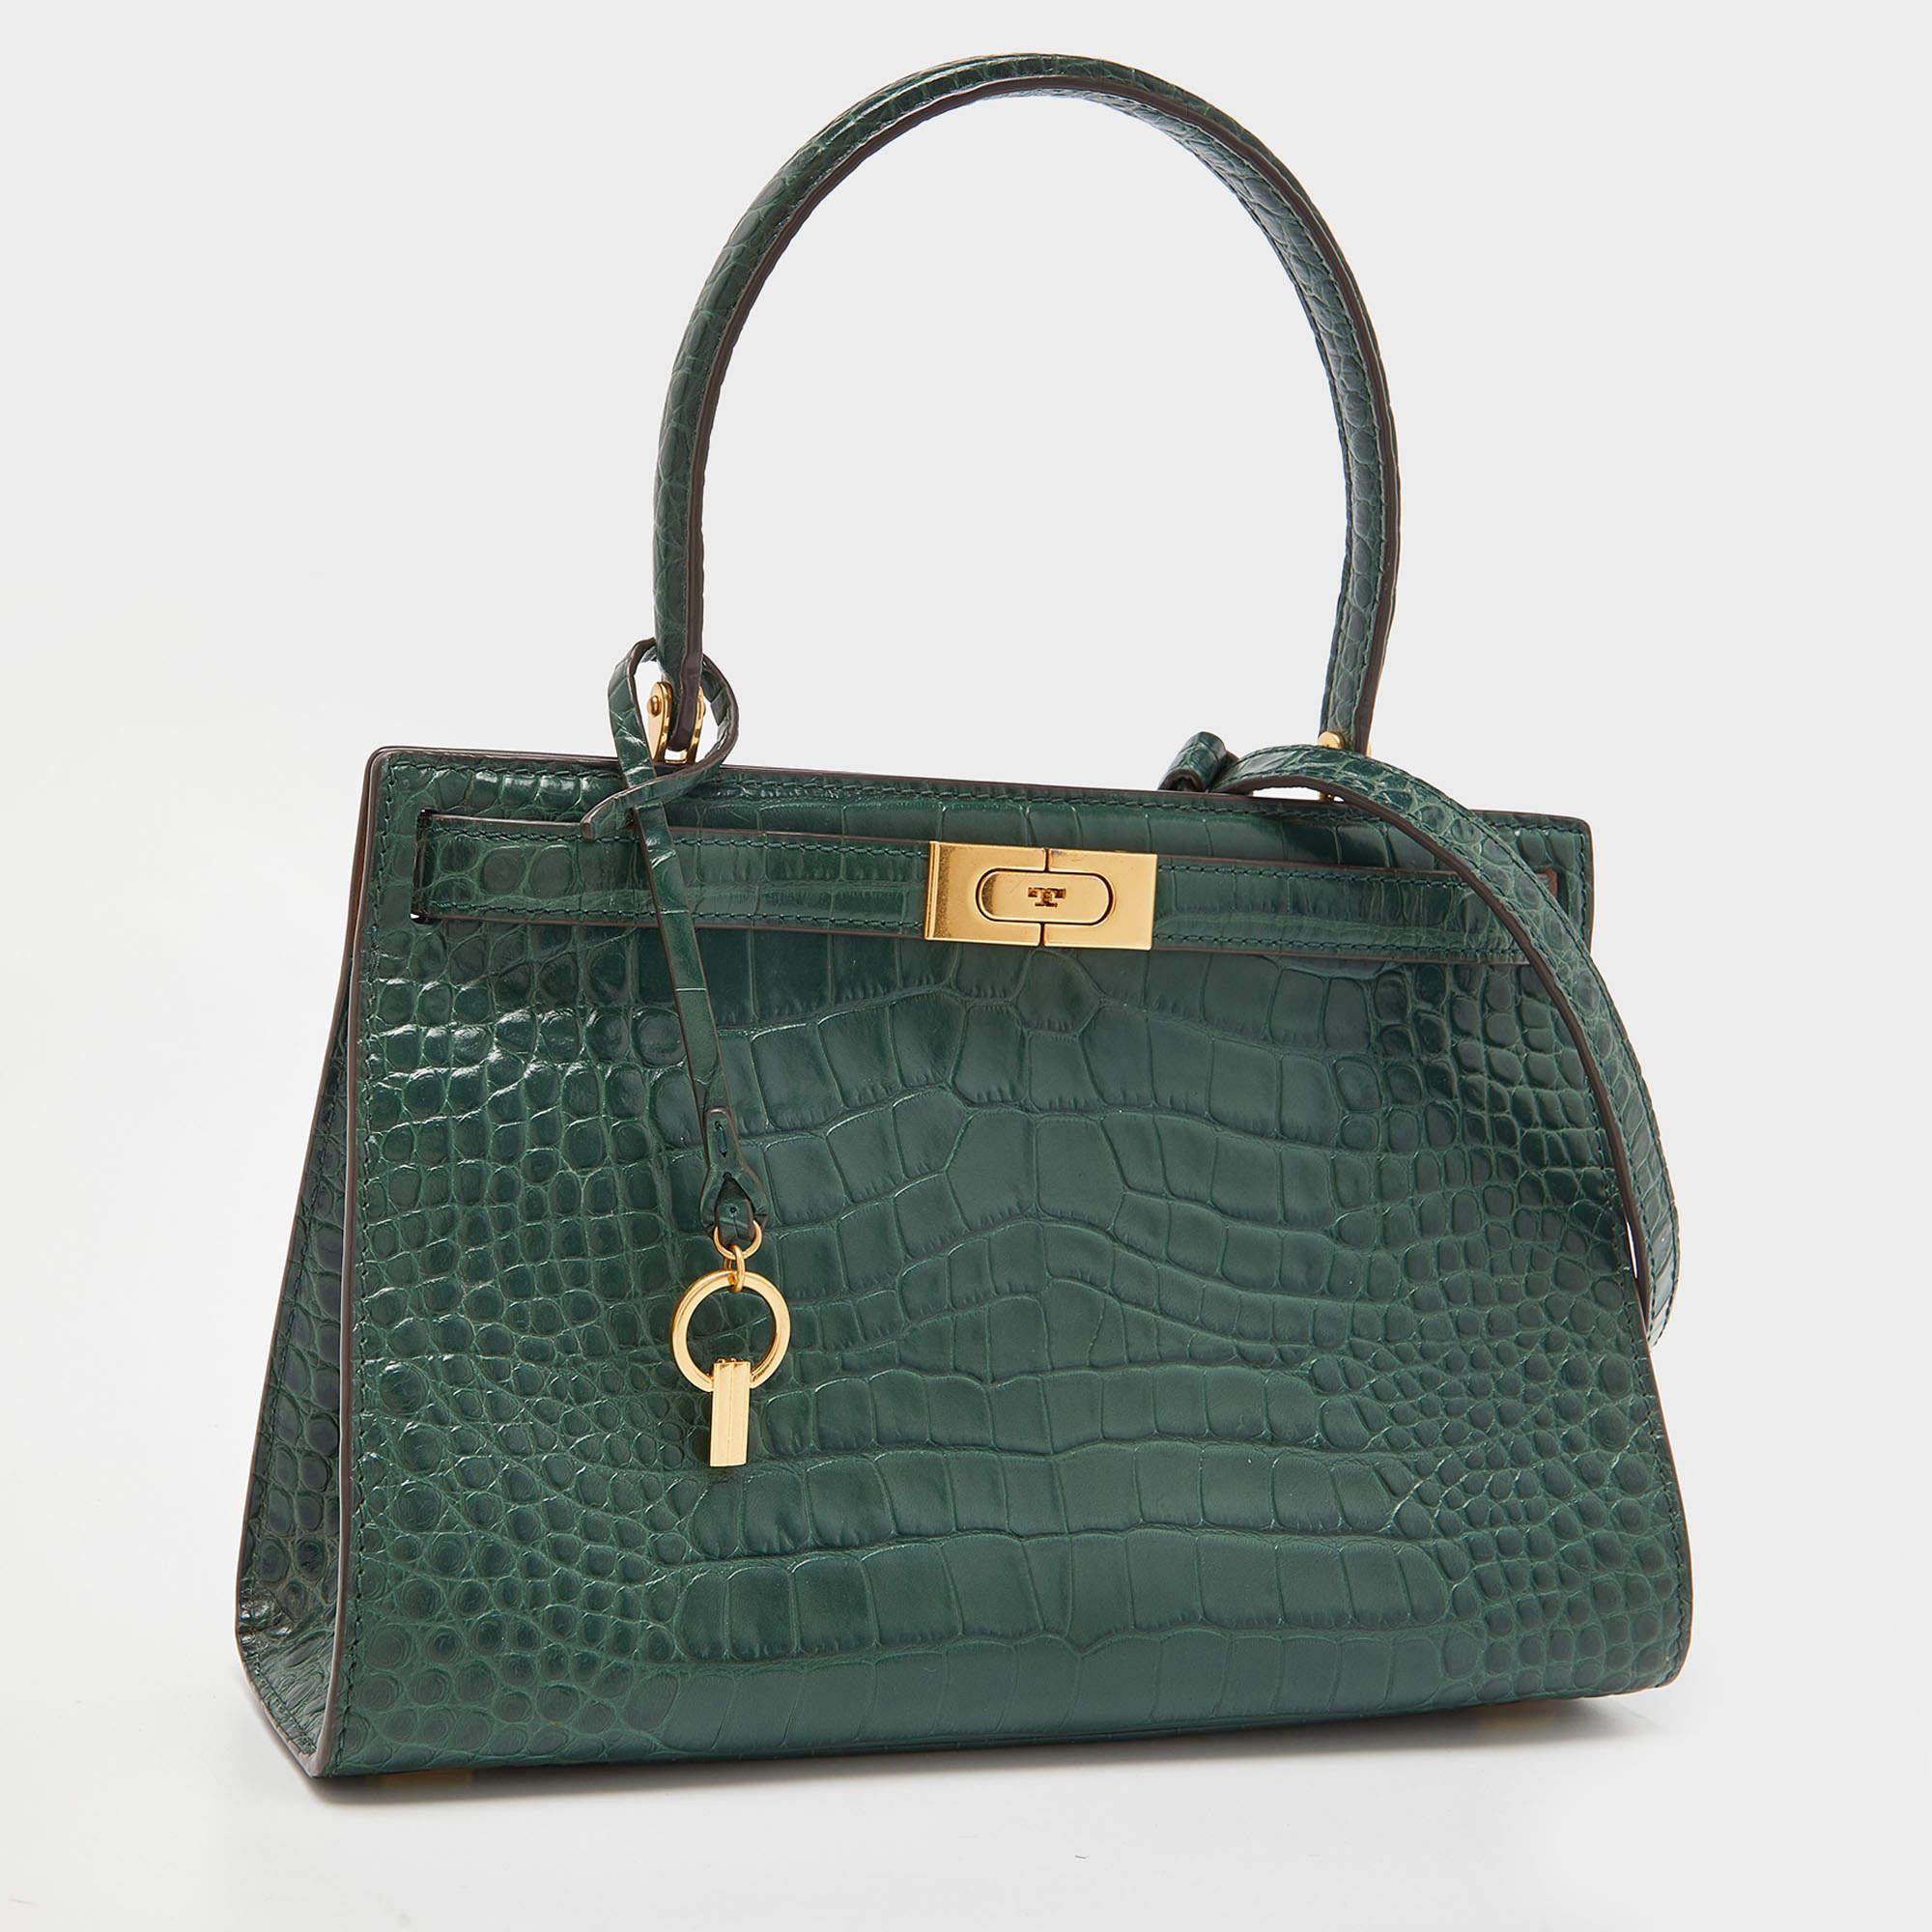 Women's Tory Burch Green Croc Embossed Leather Lee Radziwill Top Handle Bag